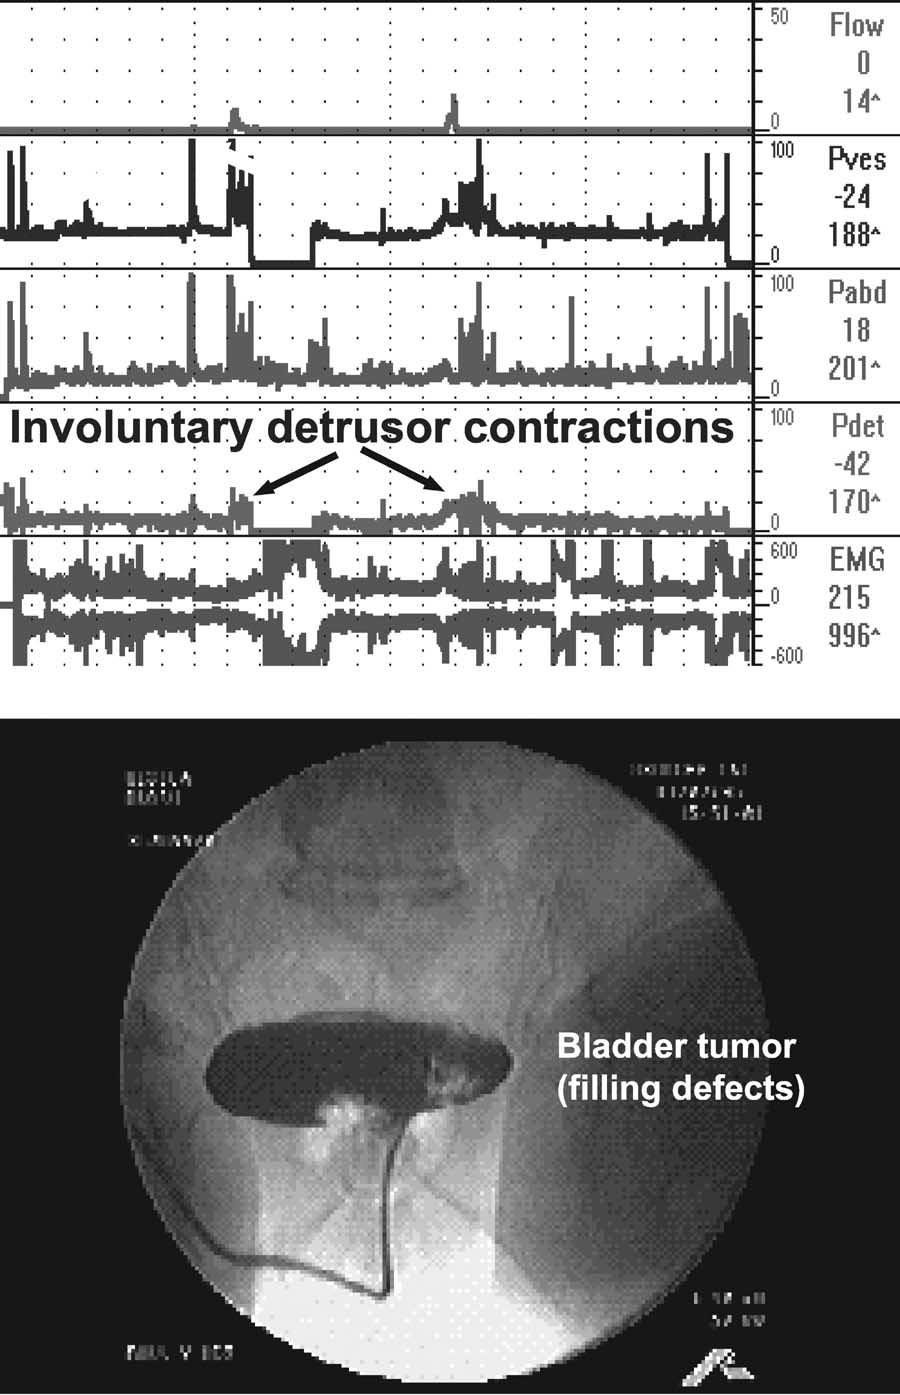 FIGURE 8. Involuntary detrusor contractions in a woman with multiple transitional cell bladder tumors. (Top) A 72-year-old woman with urgency and frequency, but no hematuria.